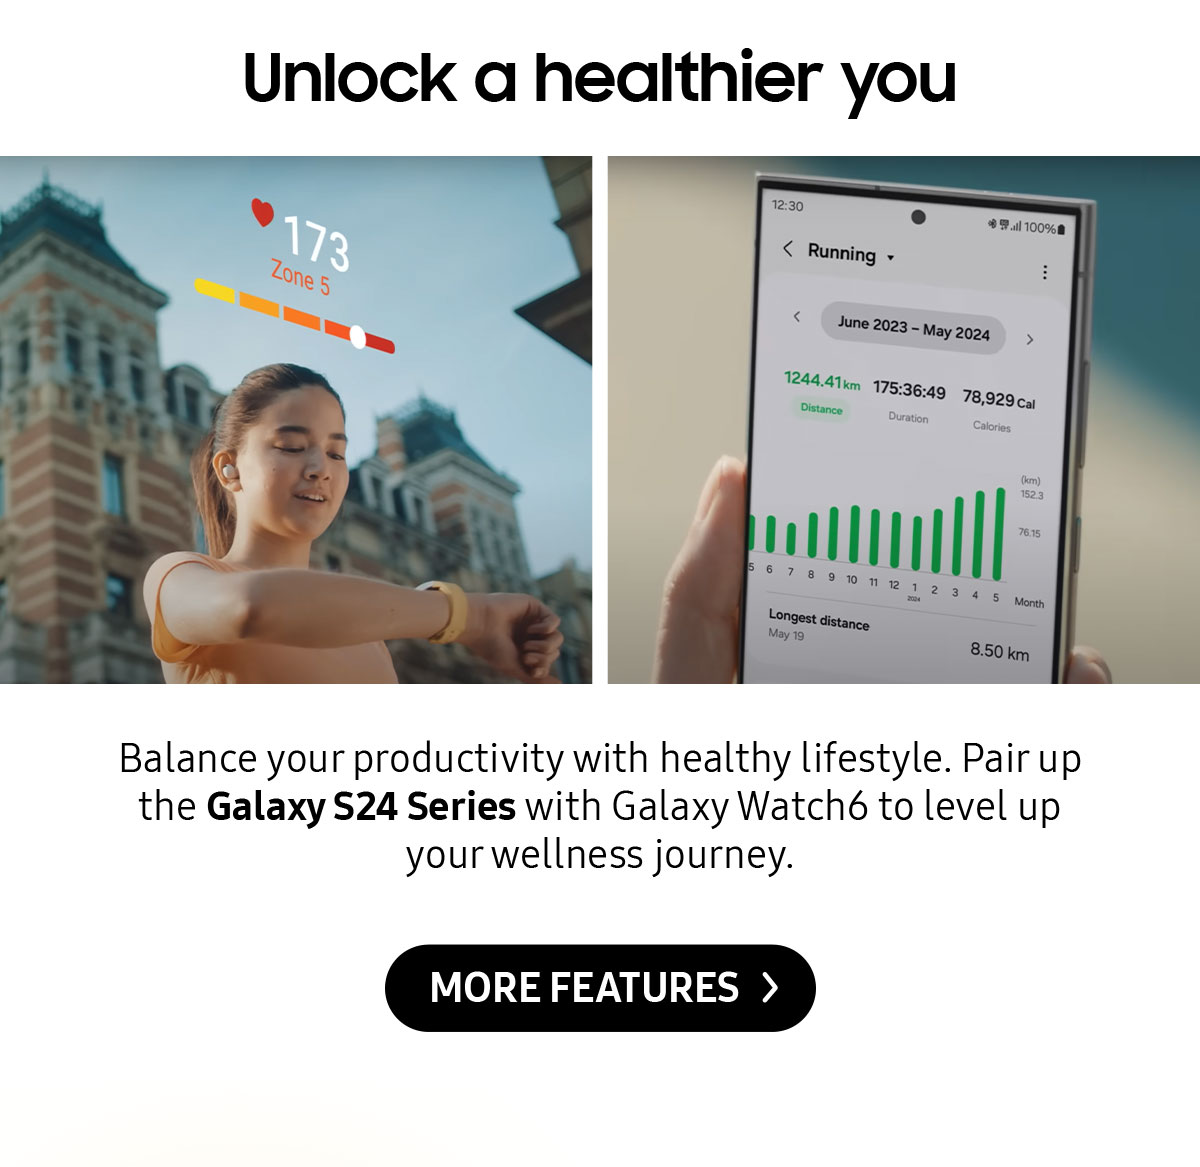 Unlock a healthier you | Balance your productivity with healthy lifestyle. Pair up the Galaxy S24 Series with Galaxy Watch6 to level up your wellness journey.